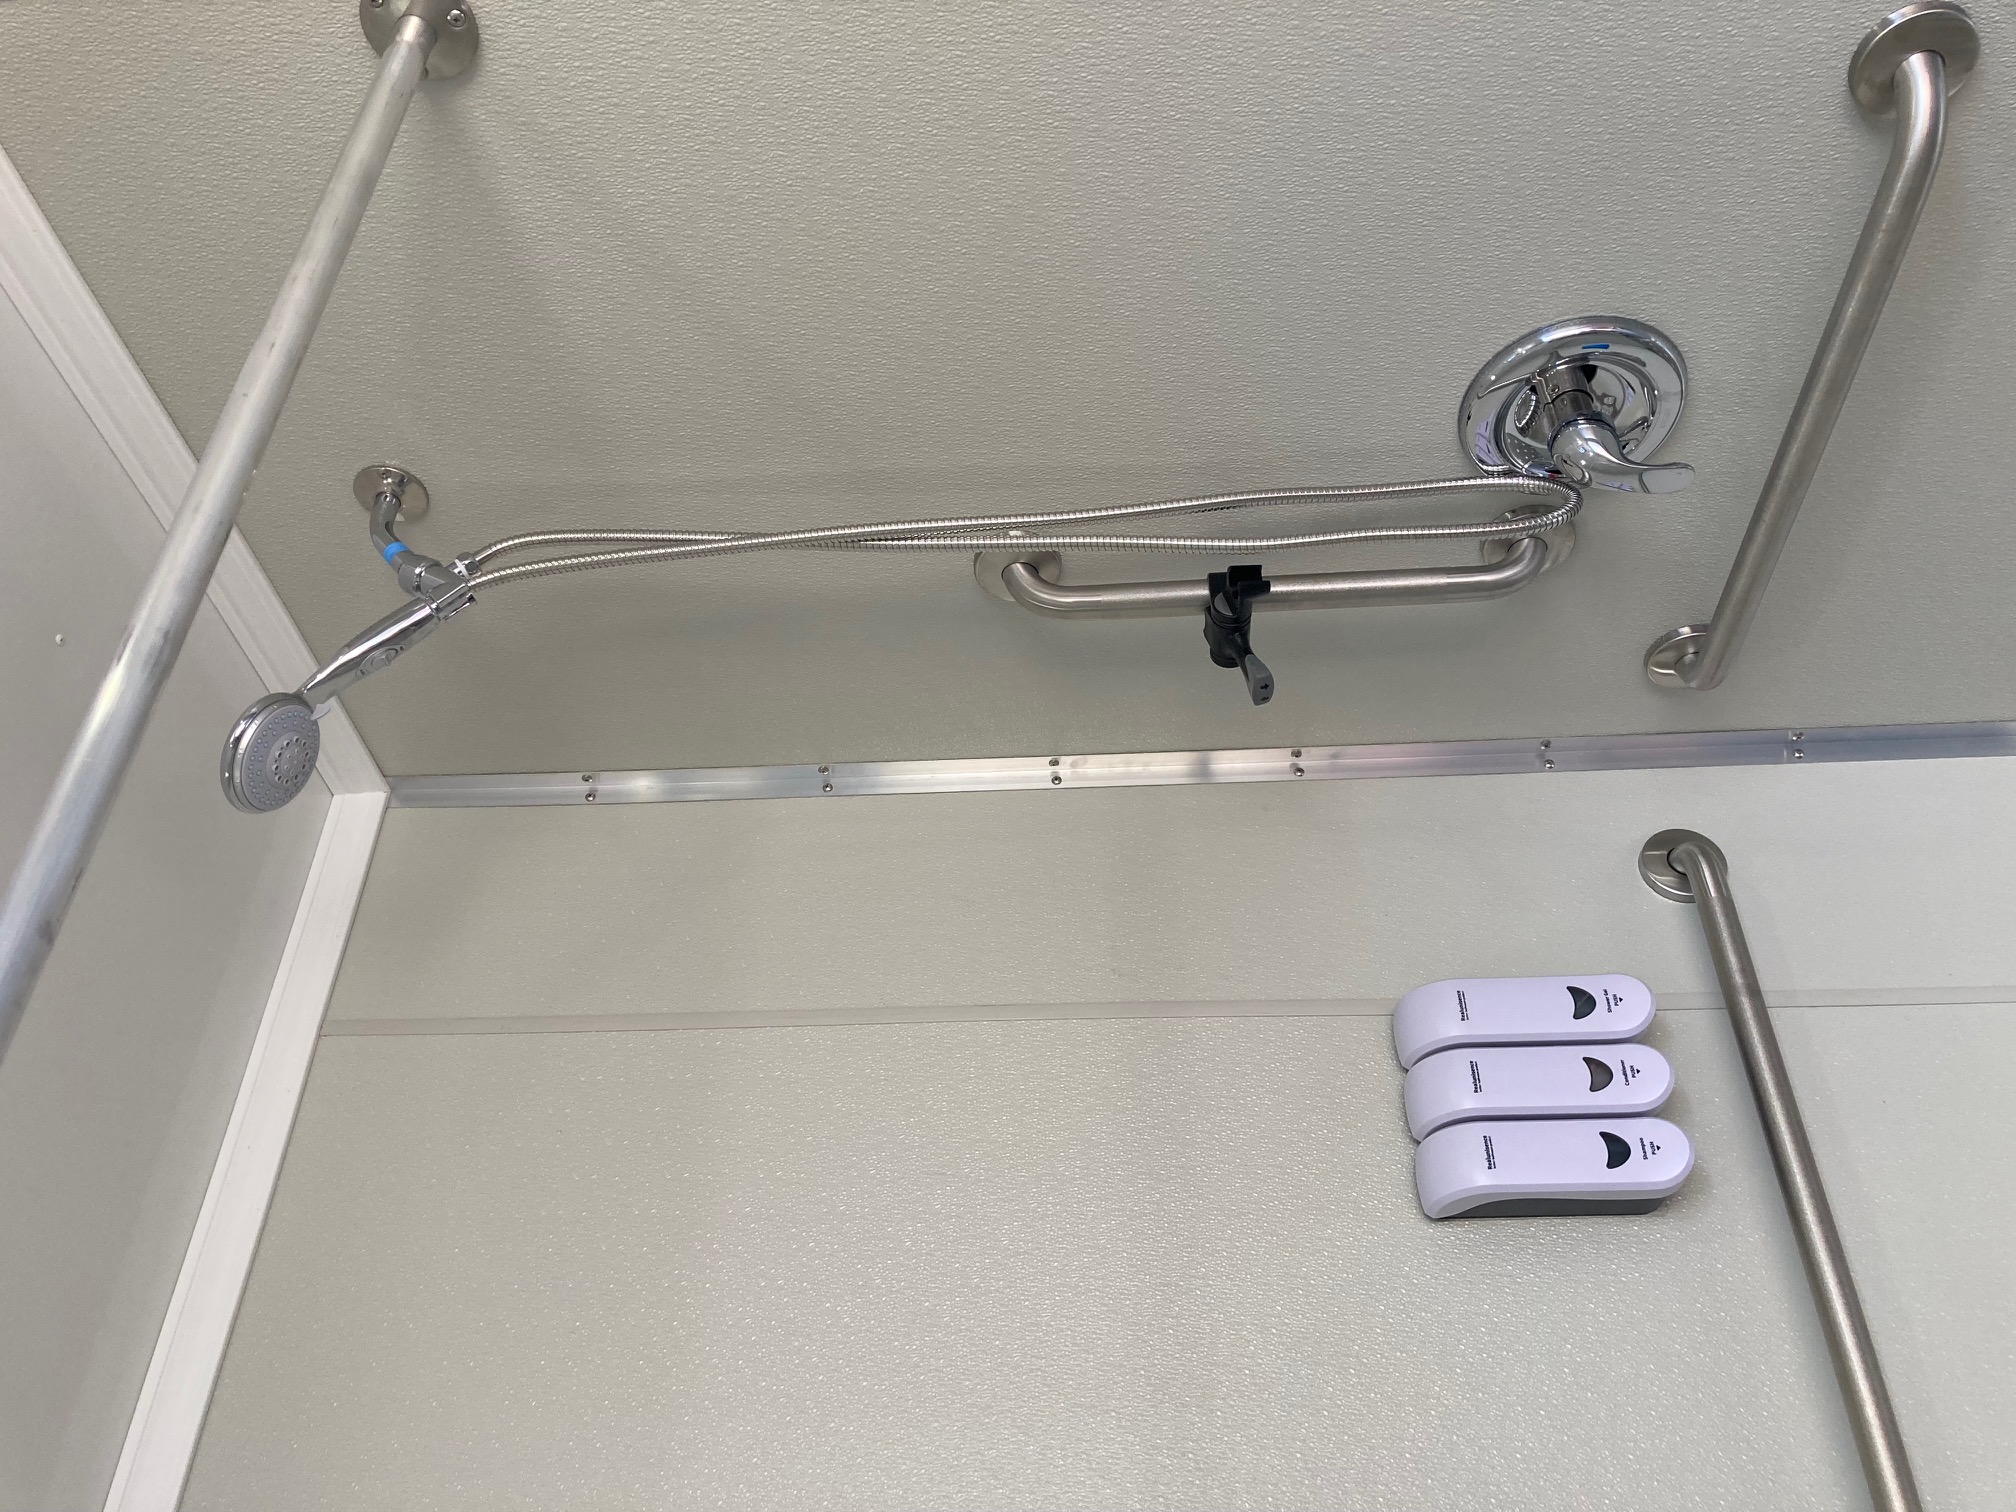 This is the handicap-accessible stall in the Connecting Grounds new shower trailer.